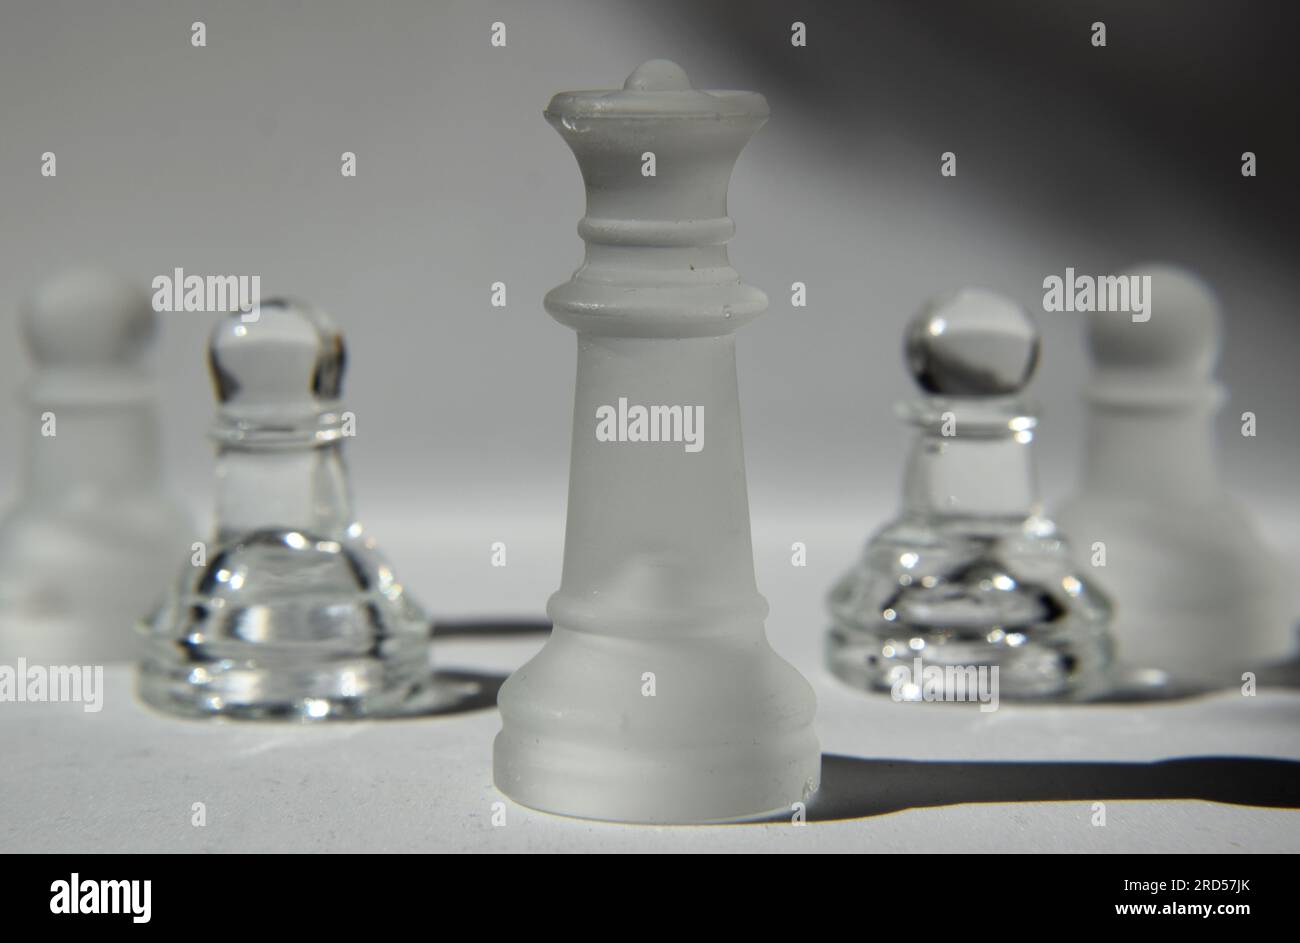 Chess Opening. Catalan Opening. Stock Image - Image of white, queen:  109545171